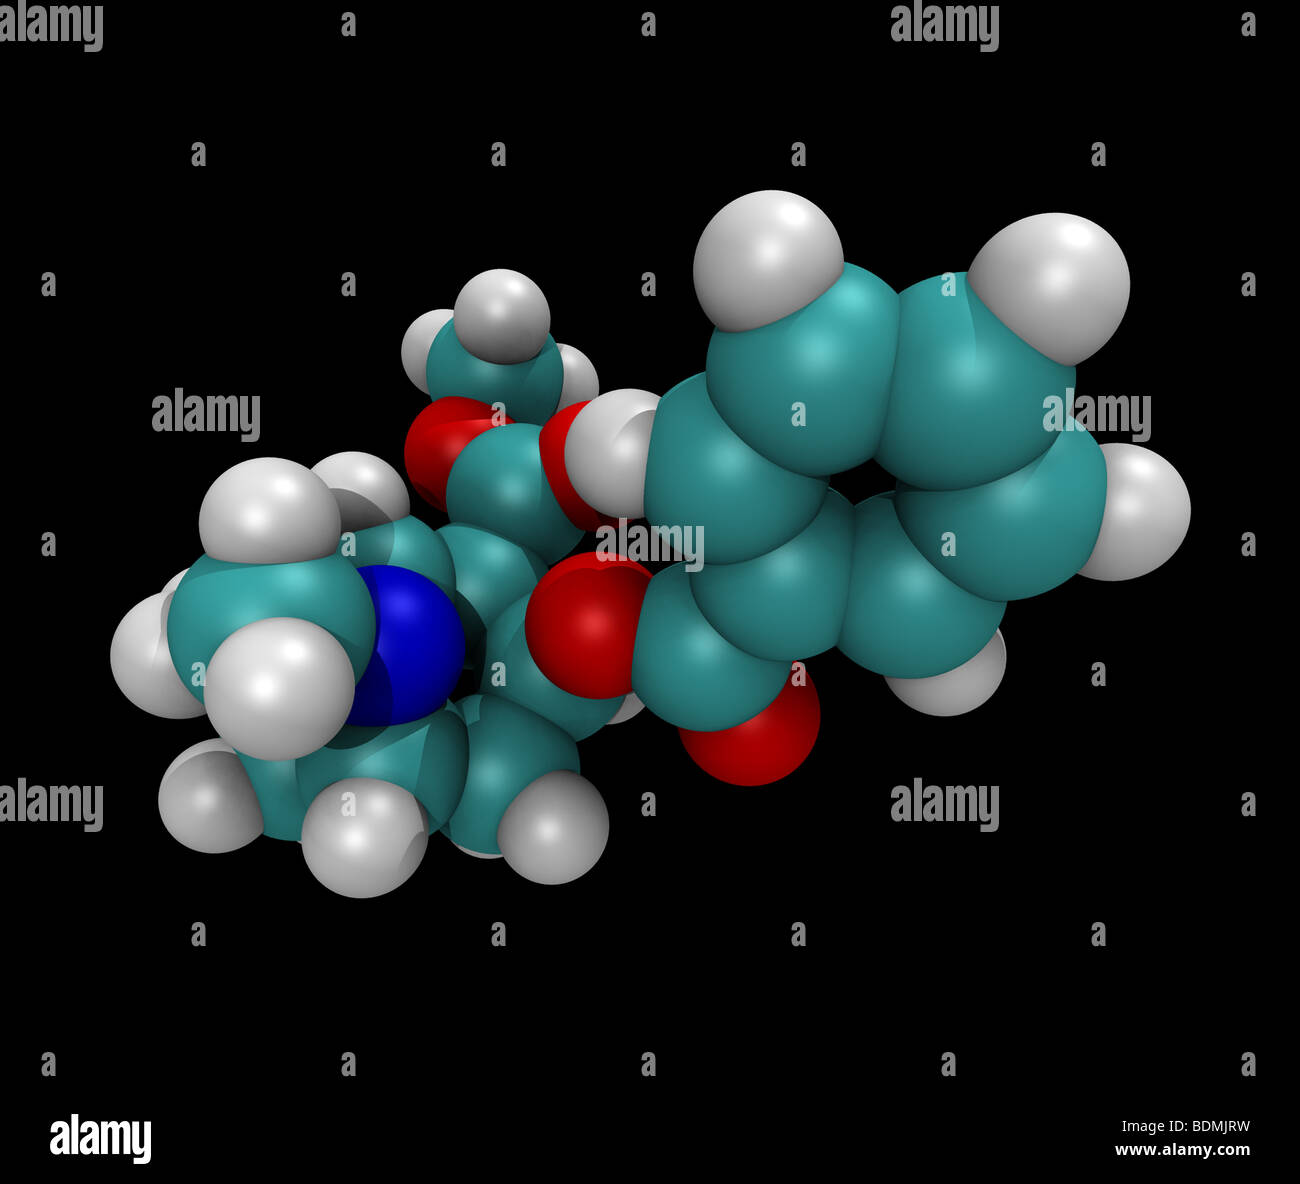 three-dimensional, space-filling, computer-generated molecular model of cocaine Stock Photo